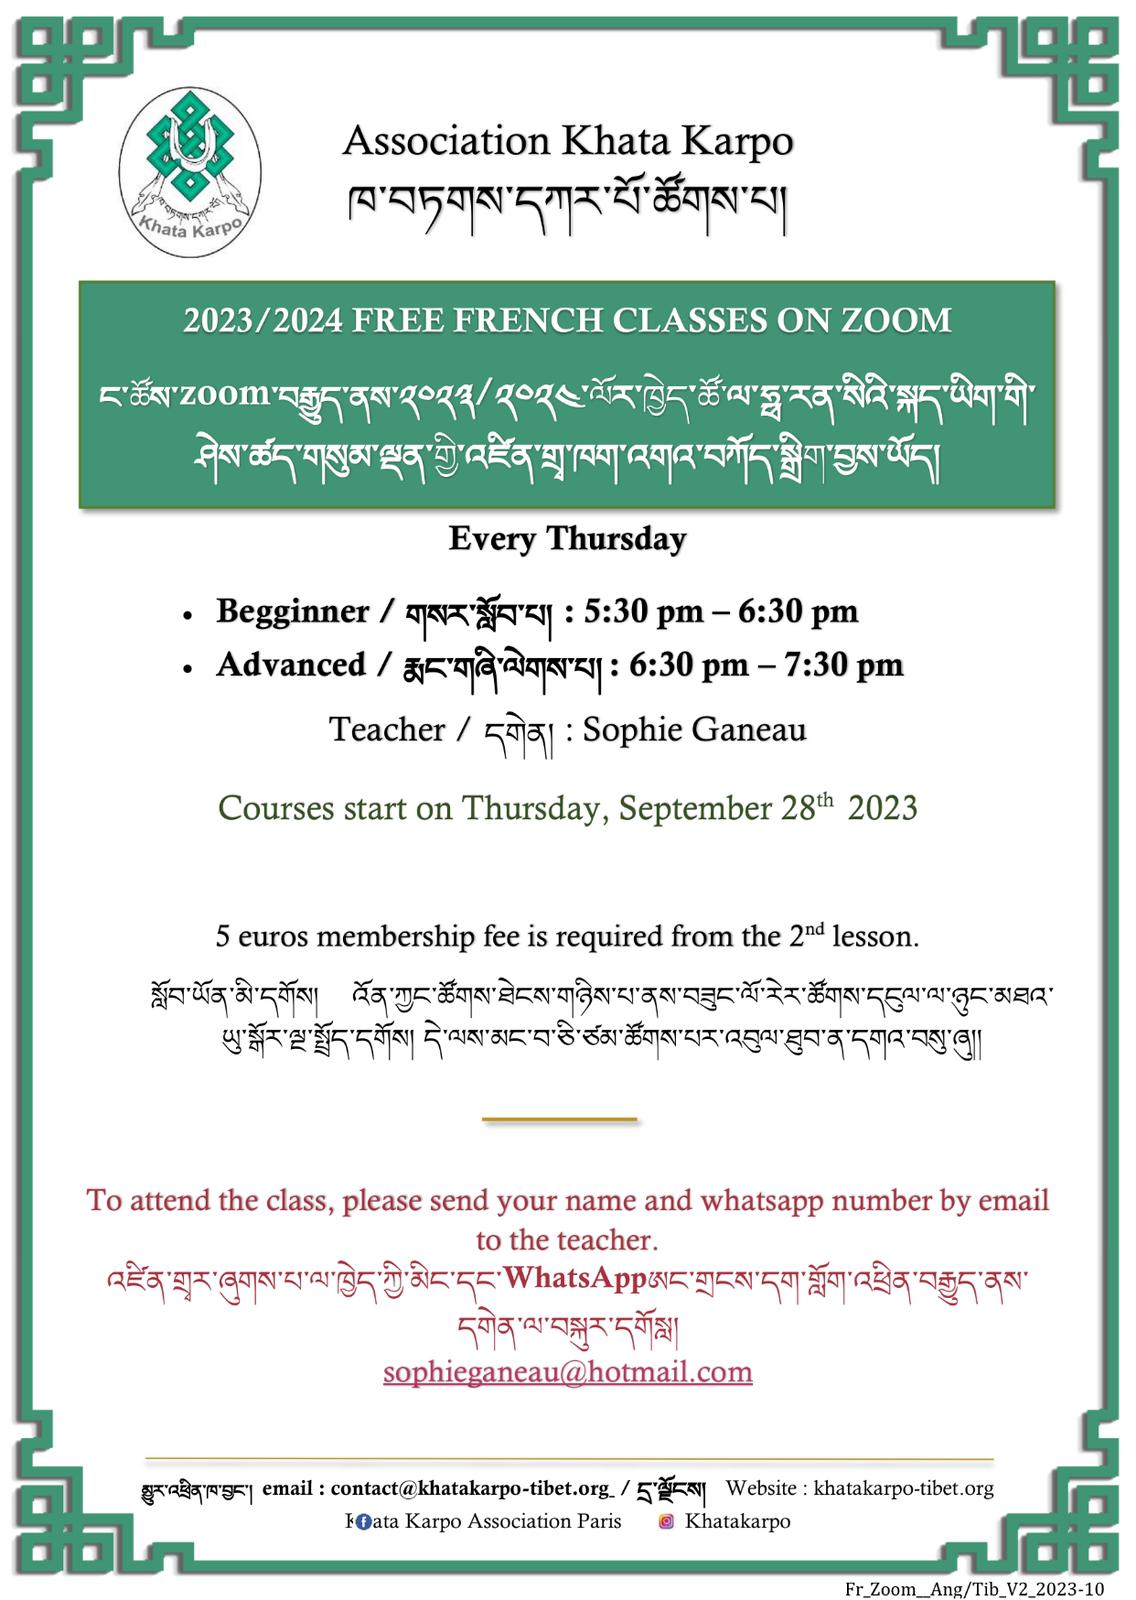 FREE FRENCH CLASSES ON ZOOM